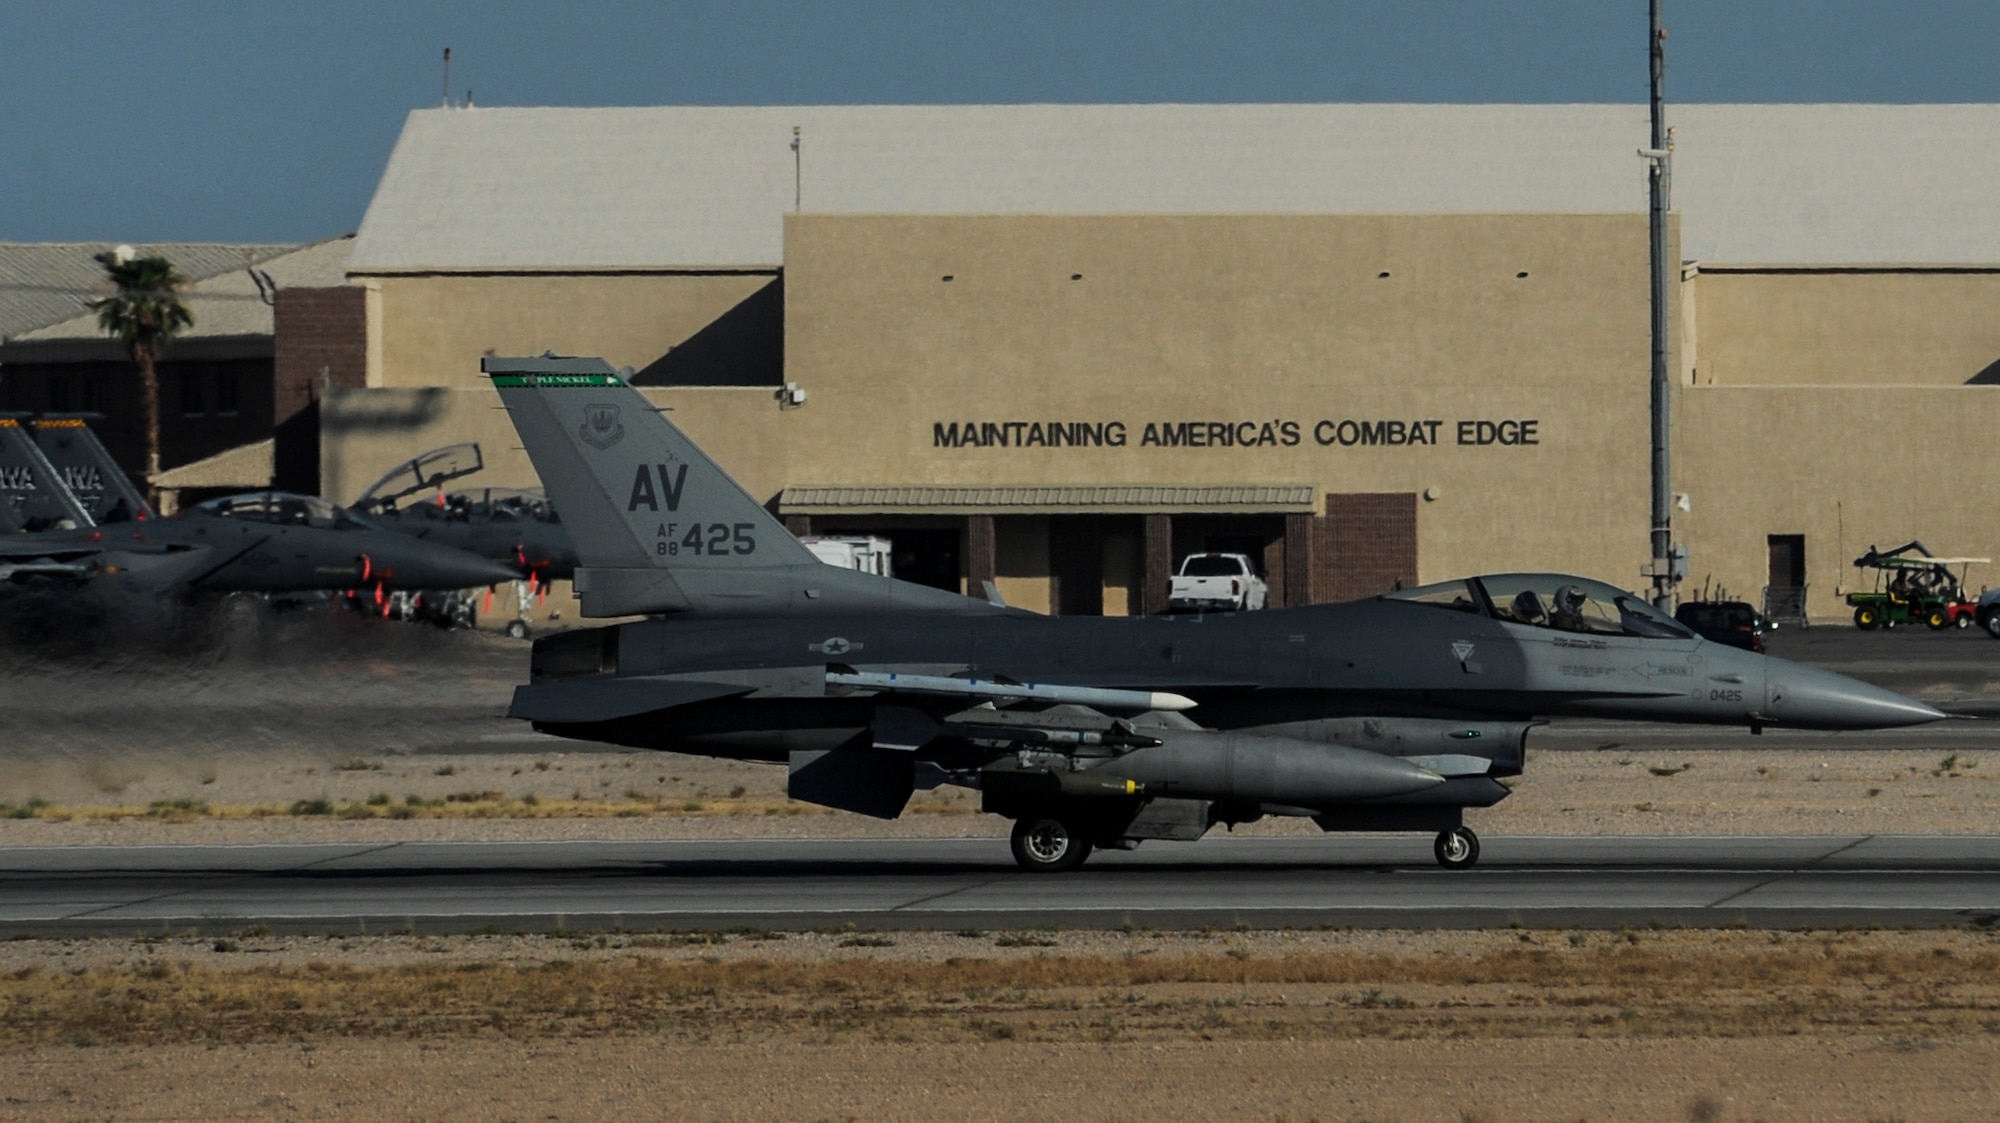 An F-16, assigned to the 555th Fighter Squadron, Aviano Air Base, Italy, accelerates down the runway during take-off at Nellis Air Force Base, Nev., August 2, 2016, before participation in Green Flag 16-8. Green Flag exercises provide critical joint training for approximately 75,000 joint and coalition personnel per year, including 3,000 sorties, 6,000 flight hours, and the expenditure of over 700,000 pounds of live and training ordnance. (United States Air Force photo by Airman 1st Class Kevin Tanenbaum/Released)